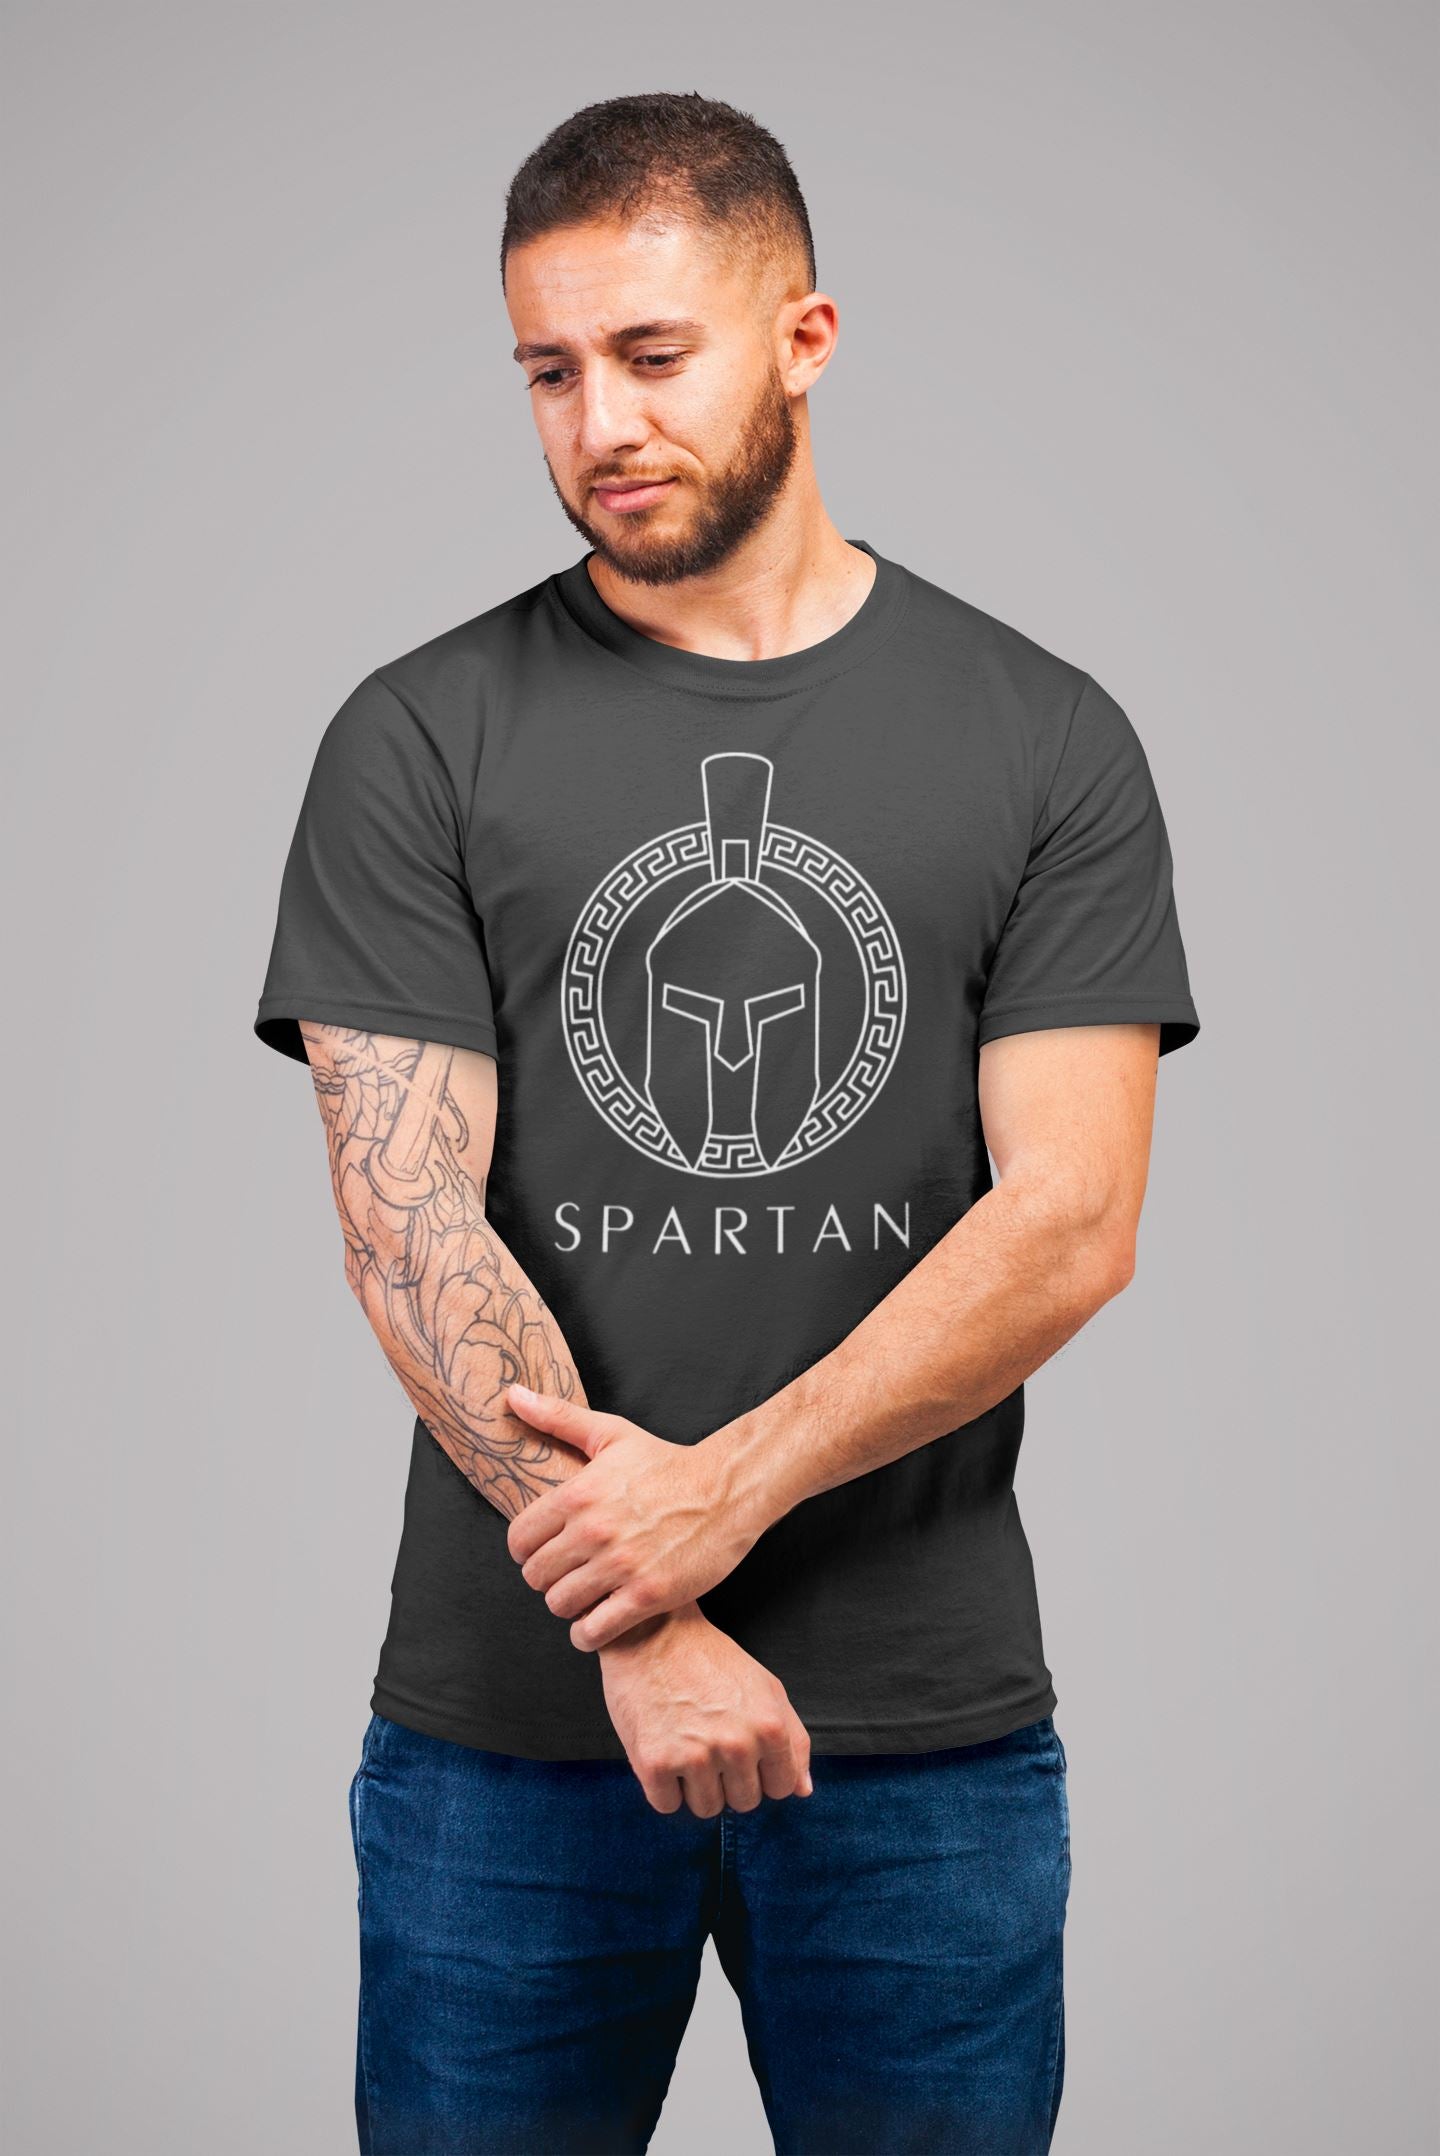 Spartan This is Sparta Exclusive Black T Shirt for Men freeshipping - Catch My Drift India